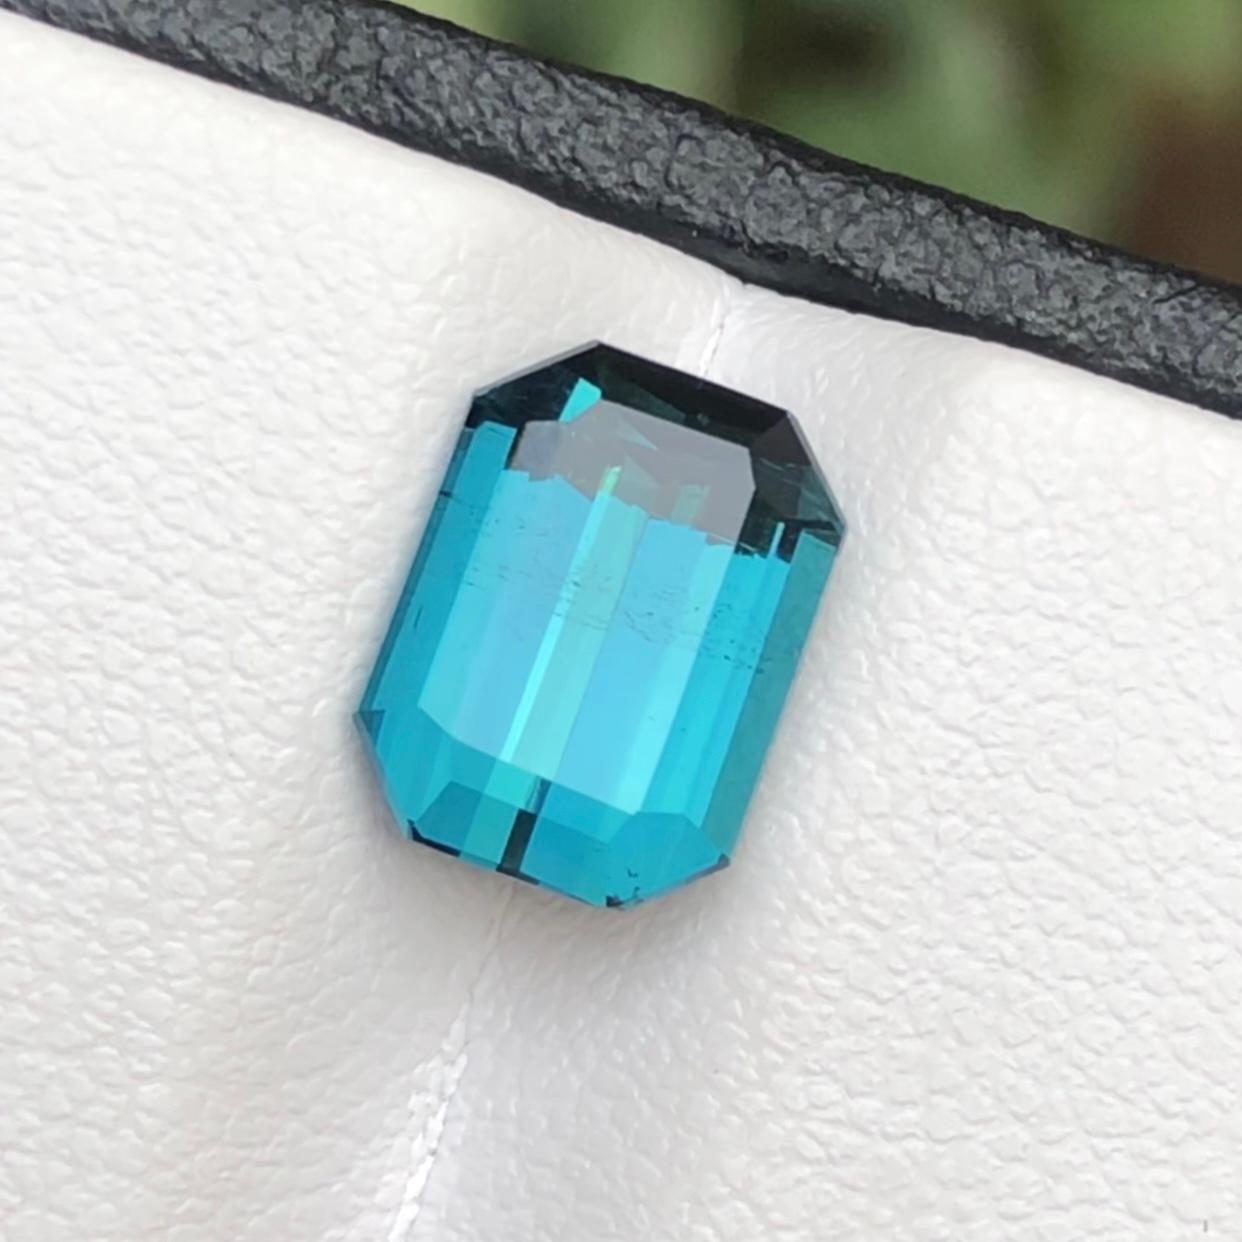 Exquisite 3.35 Carats Rare Blue Natural Tourmaline Loose Gemstone sourced from Afghanistan. This gem boasts a captivating emerald cut, revealing a stunning blue hue that is truly one-of-a-kind. Its magnificent luster and slightly included clarity